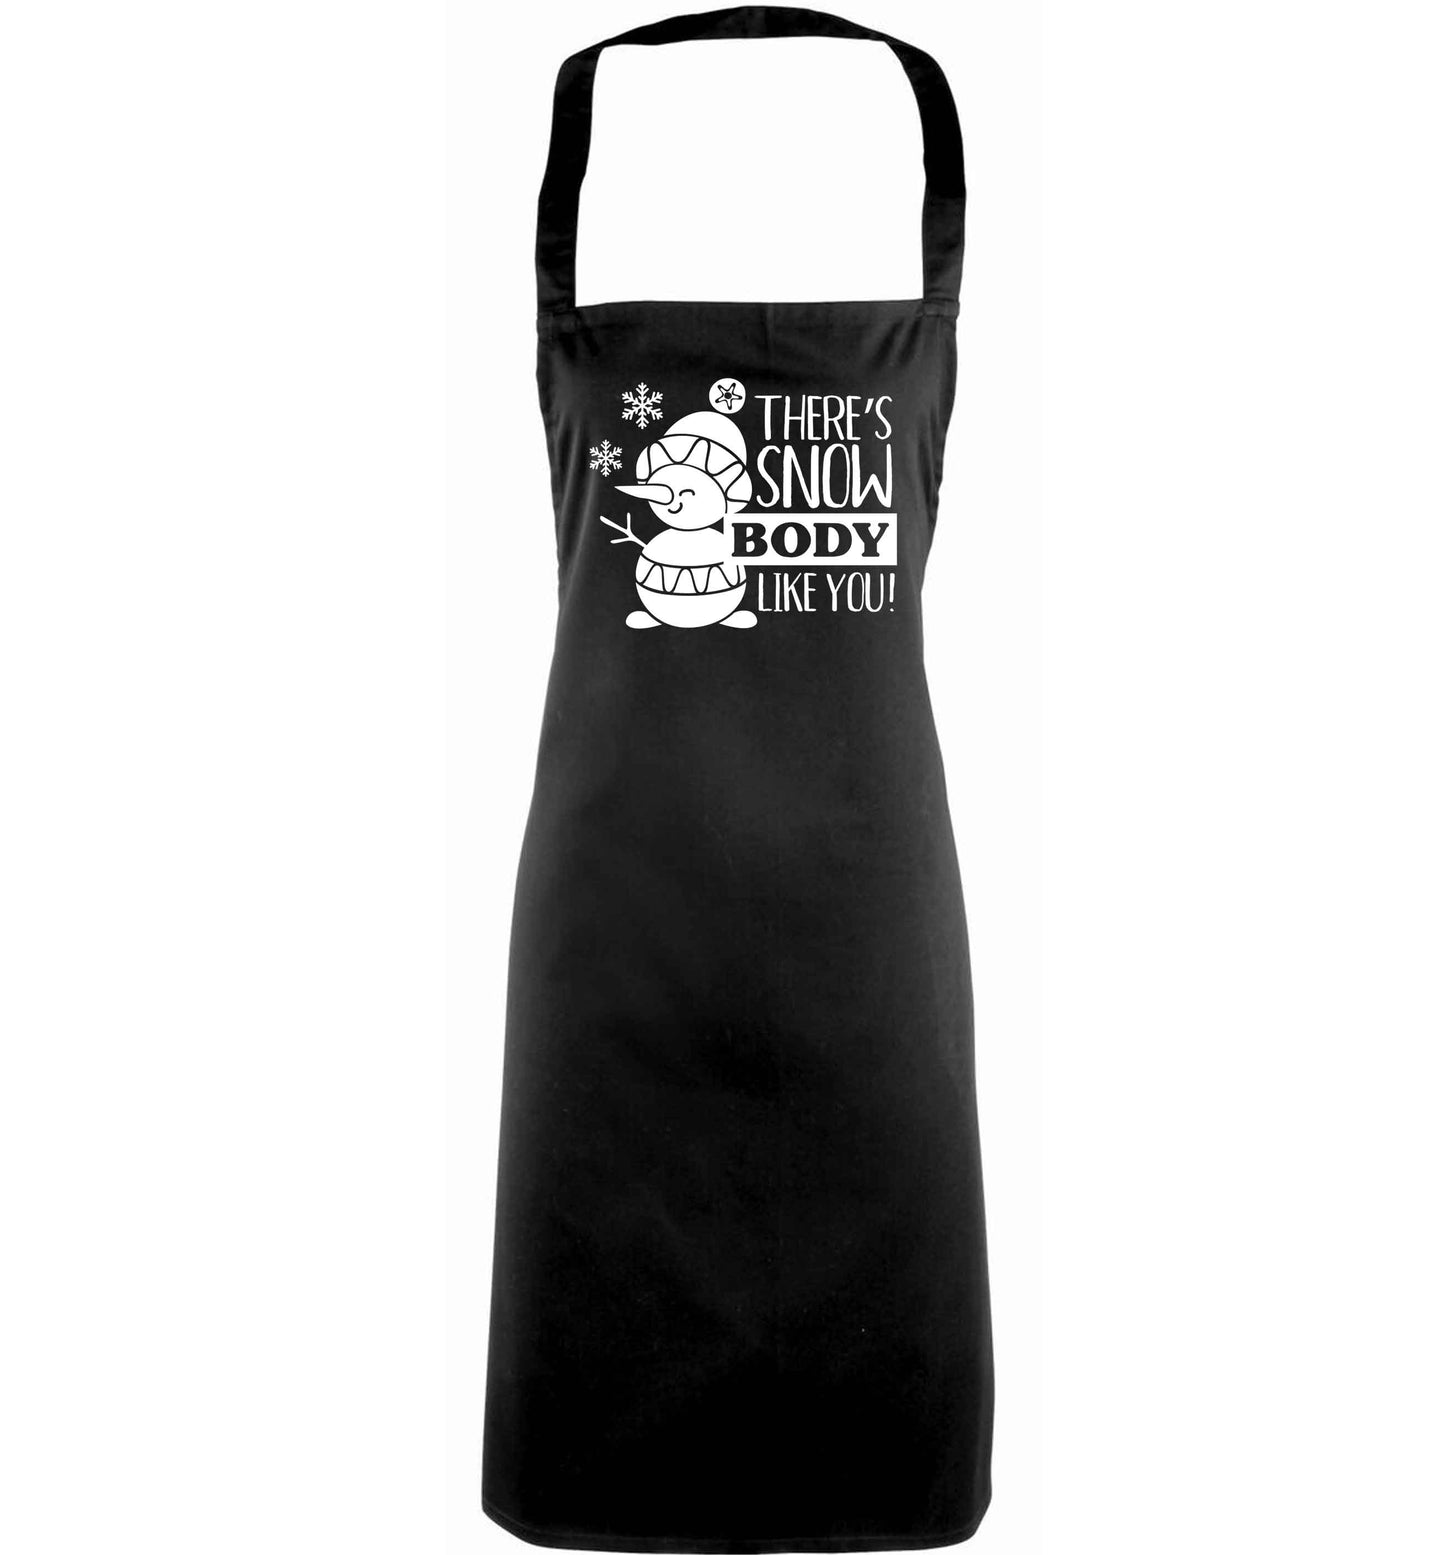 There's snow body like you adults black apron